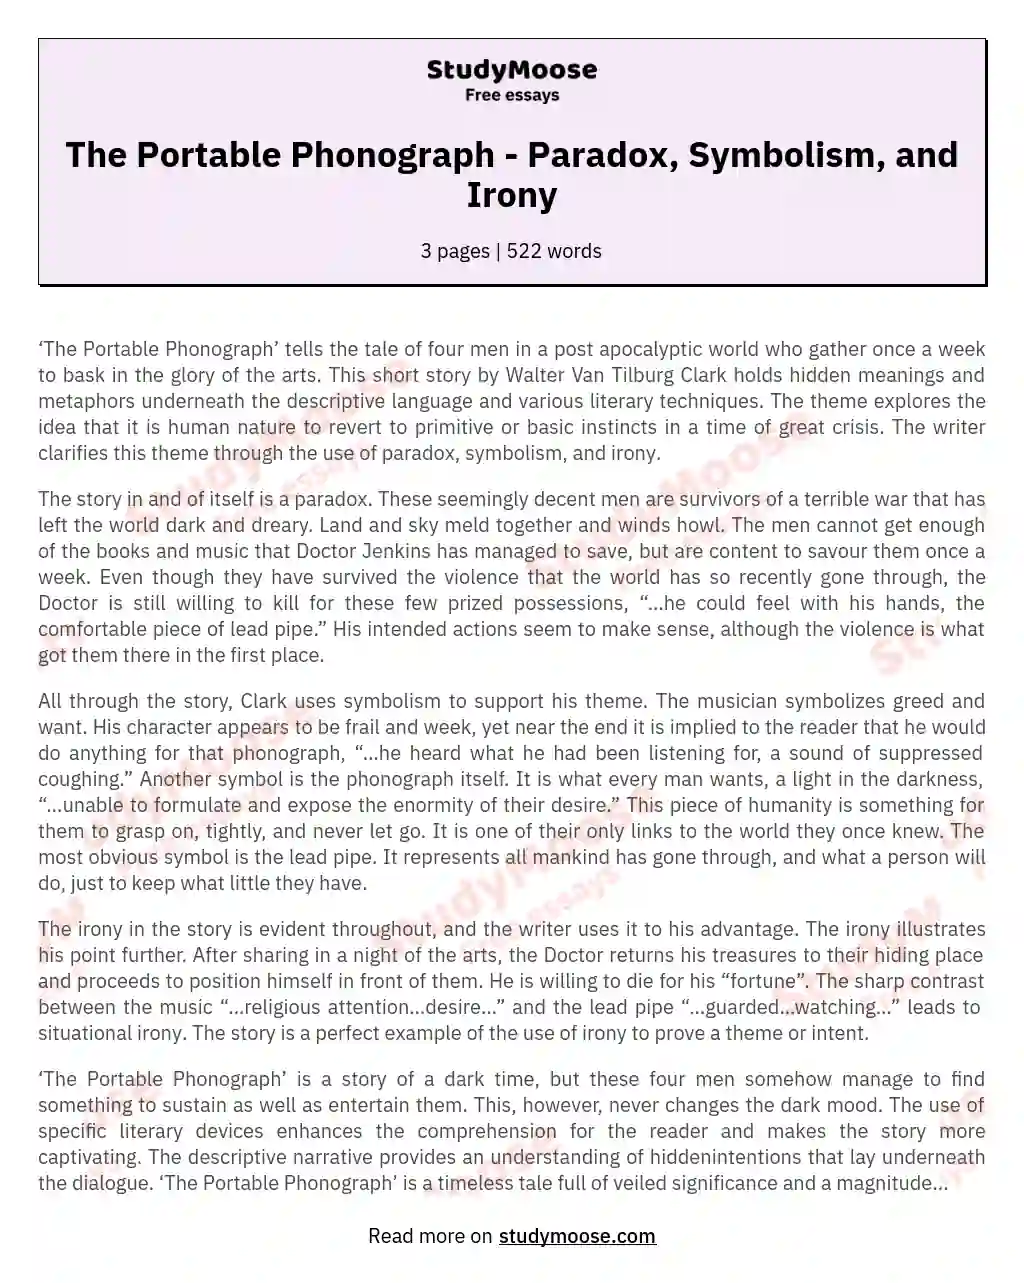 The Portable Phonograph - Paradox, Symbolism, and Irony essay